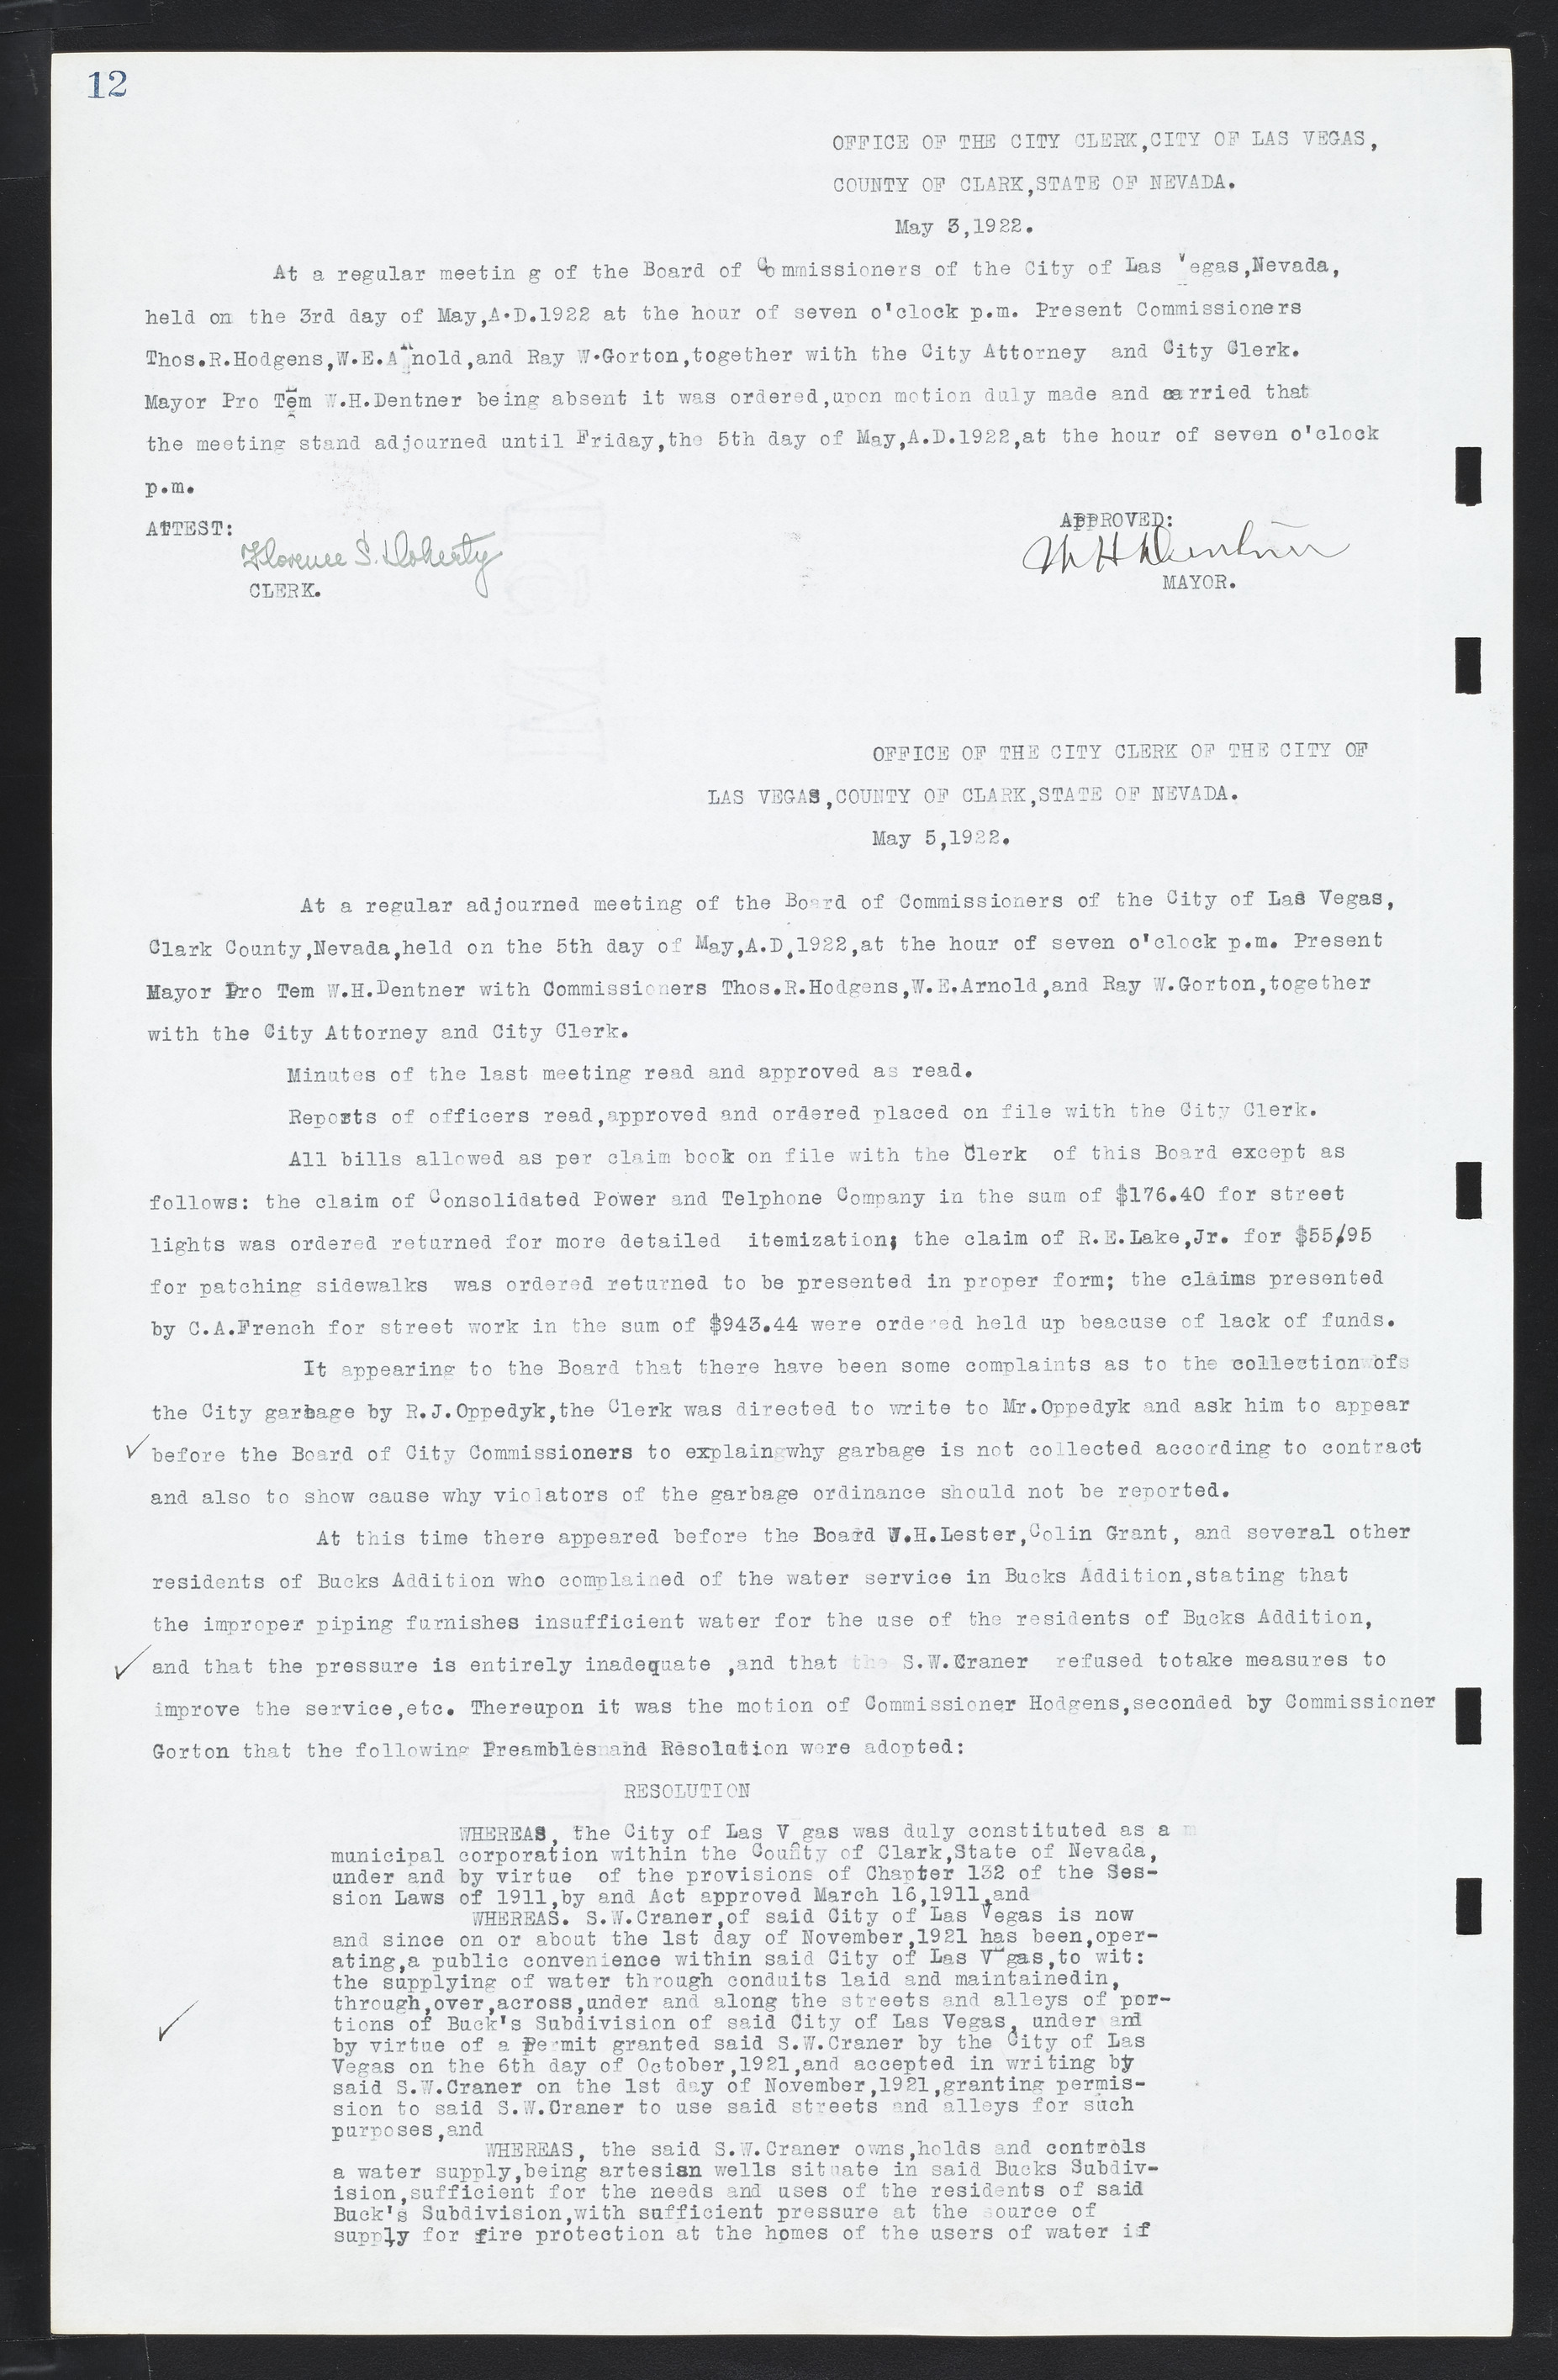 Las Vegas City Commission Minutes, March 1, 1922 to May 10, 1929, lvc000002-19